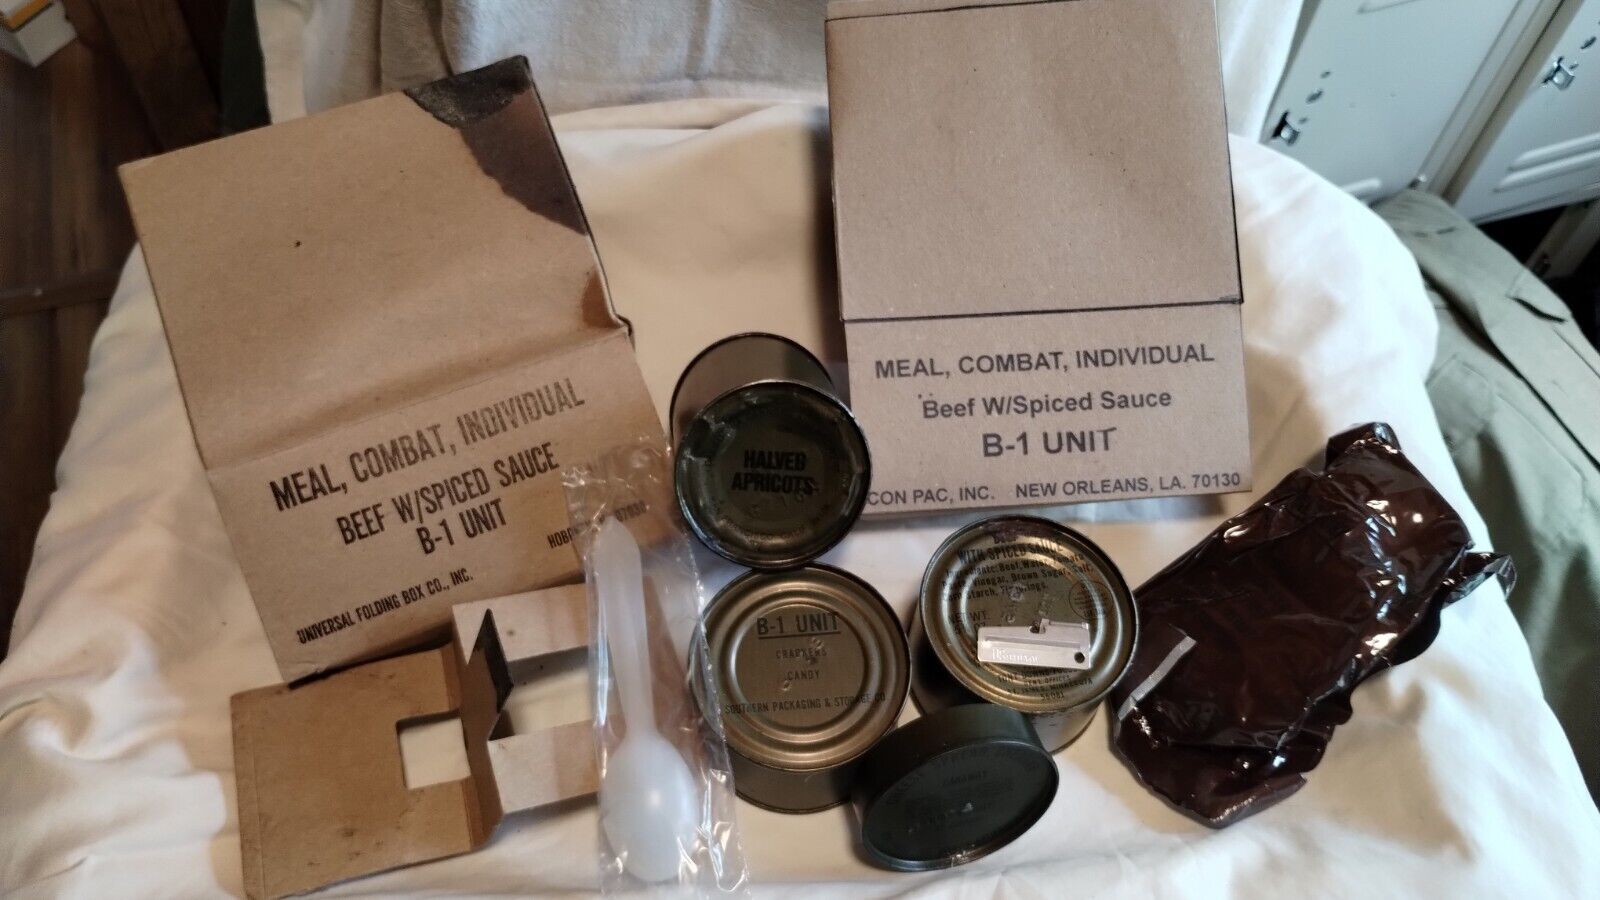 VINTAGE C Ration MEAL COMBAT INDIVIDUAL  B1 UNIT Beef W/Spiced Sauce  W/2 Boxes